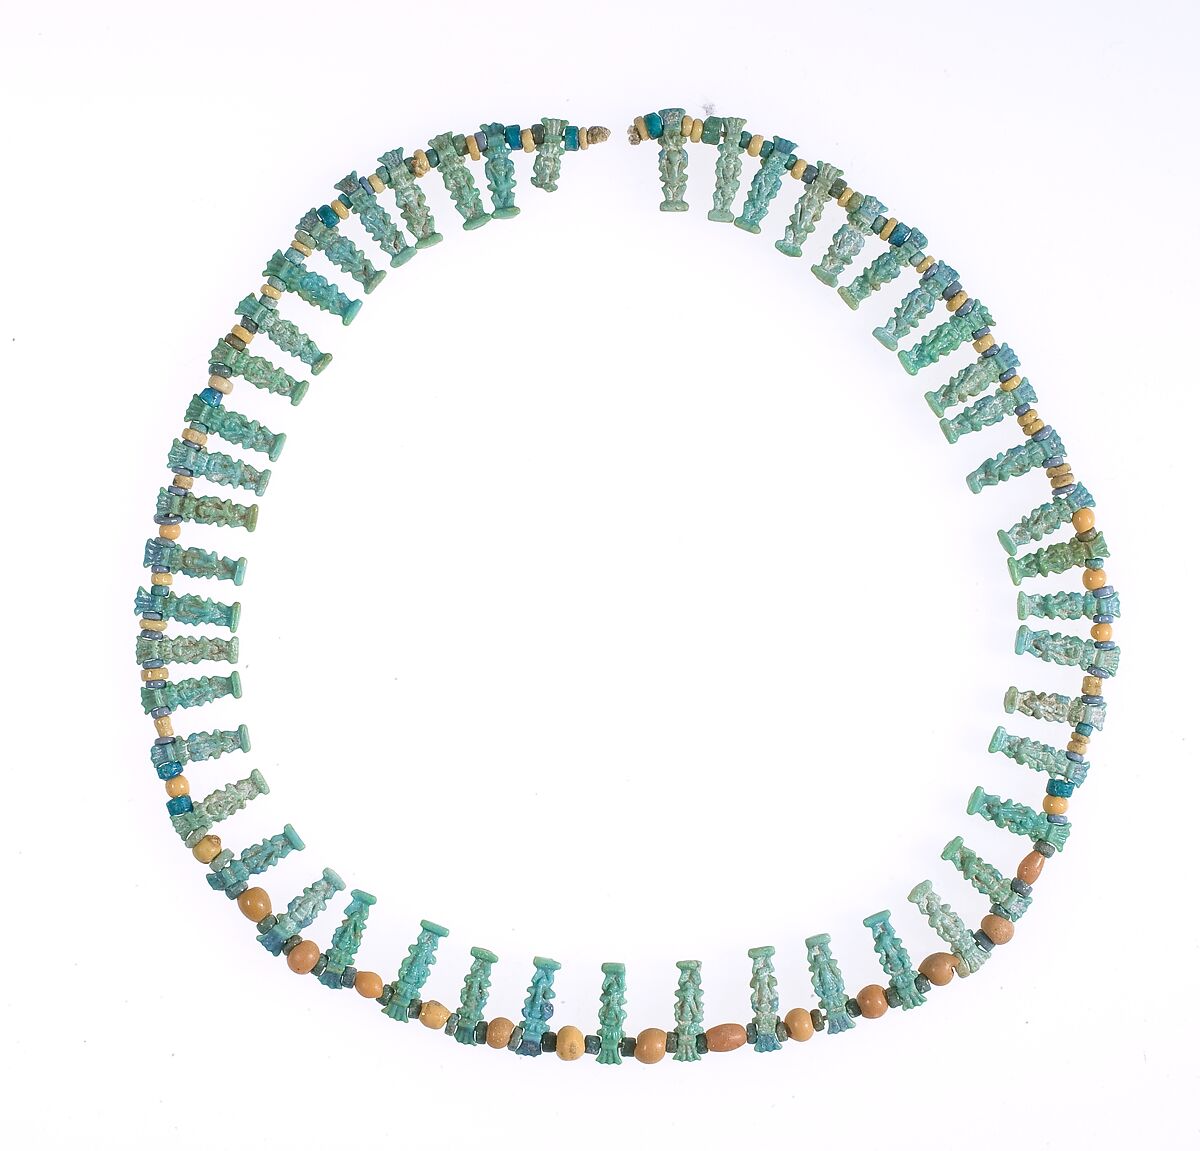 Necklace with Bes amulets, Yellow, green and blue faience 